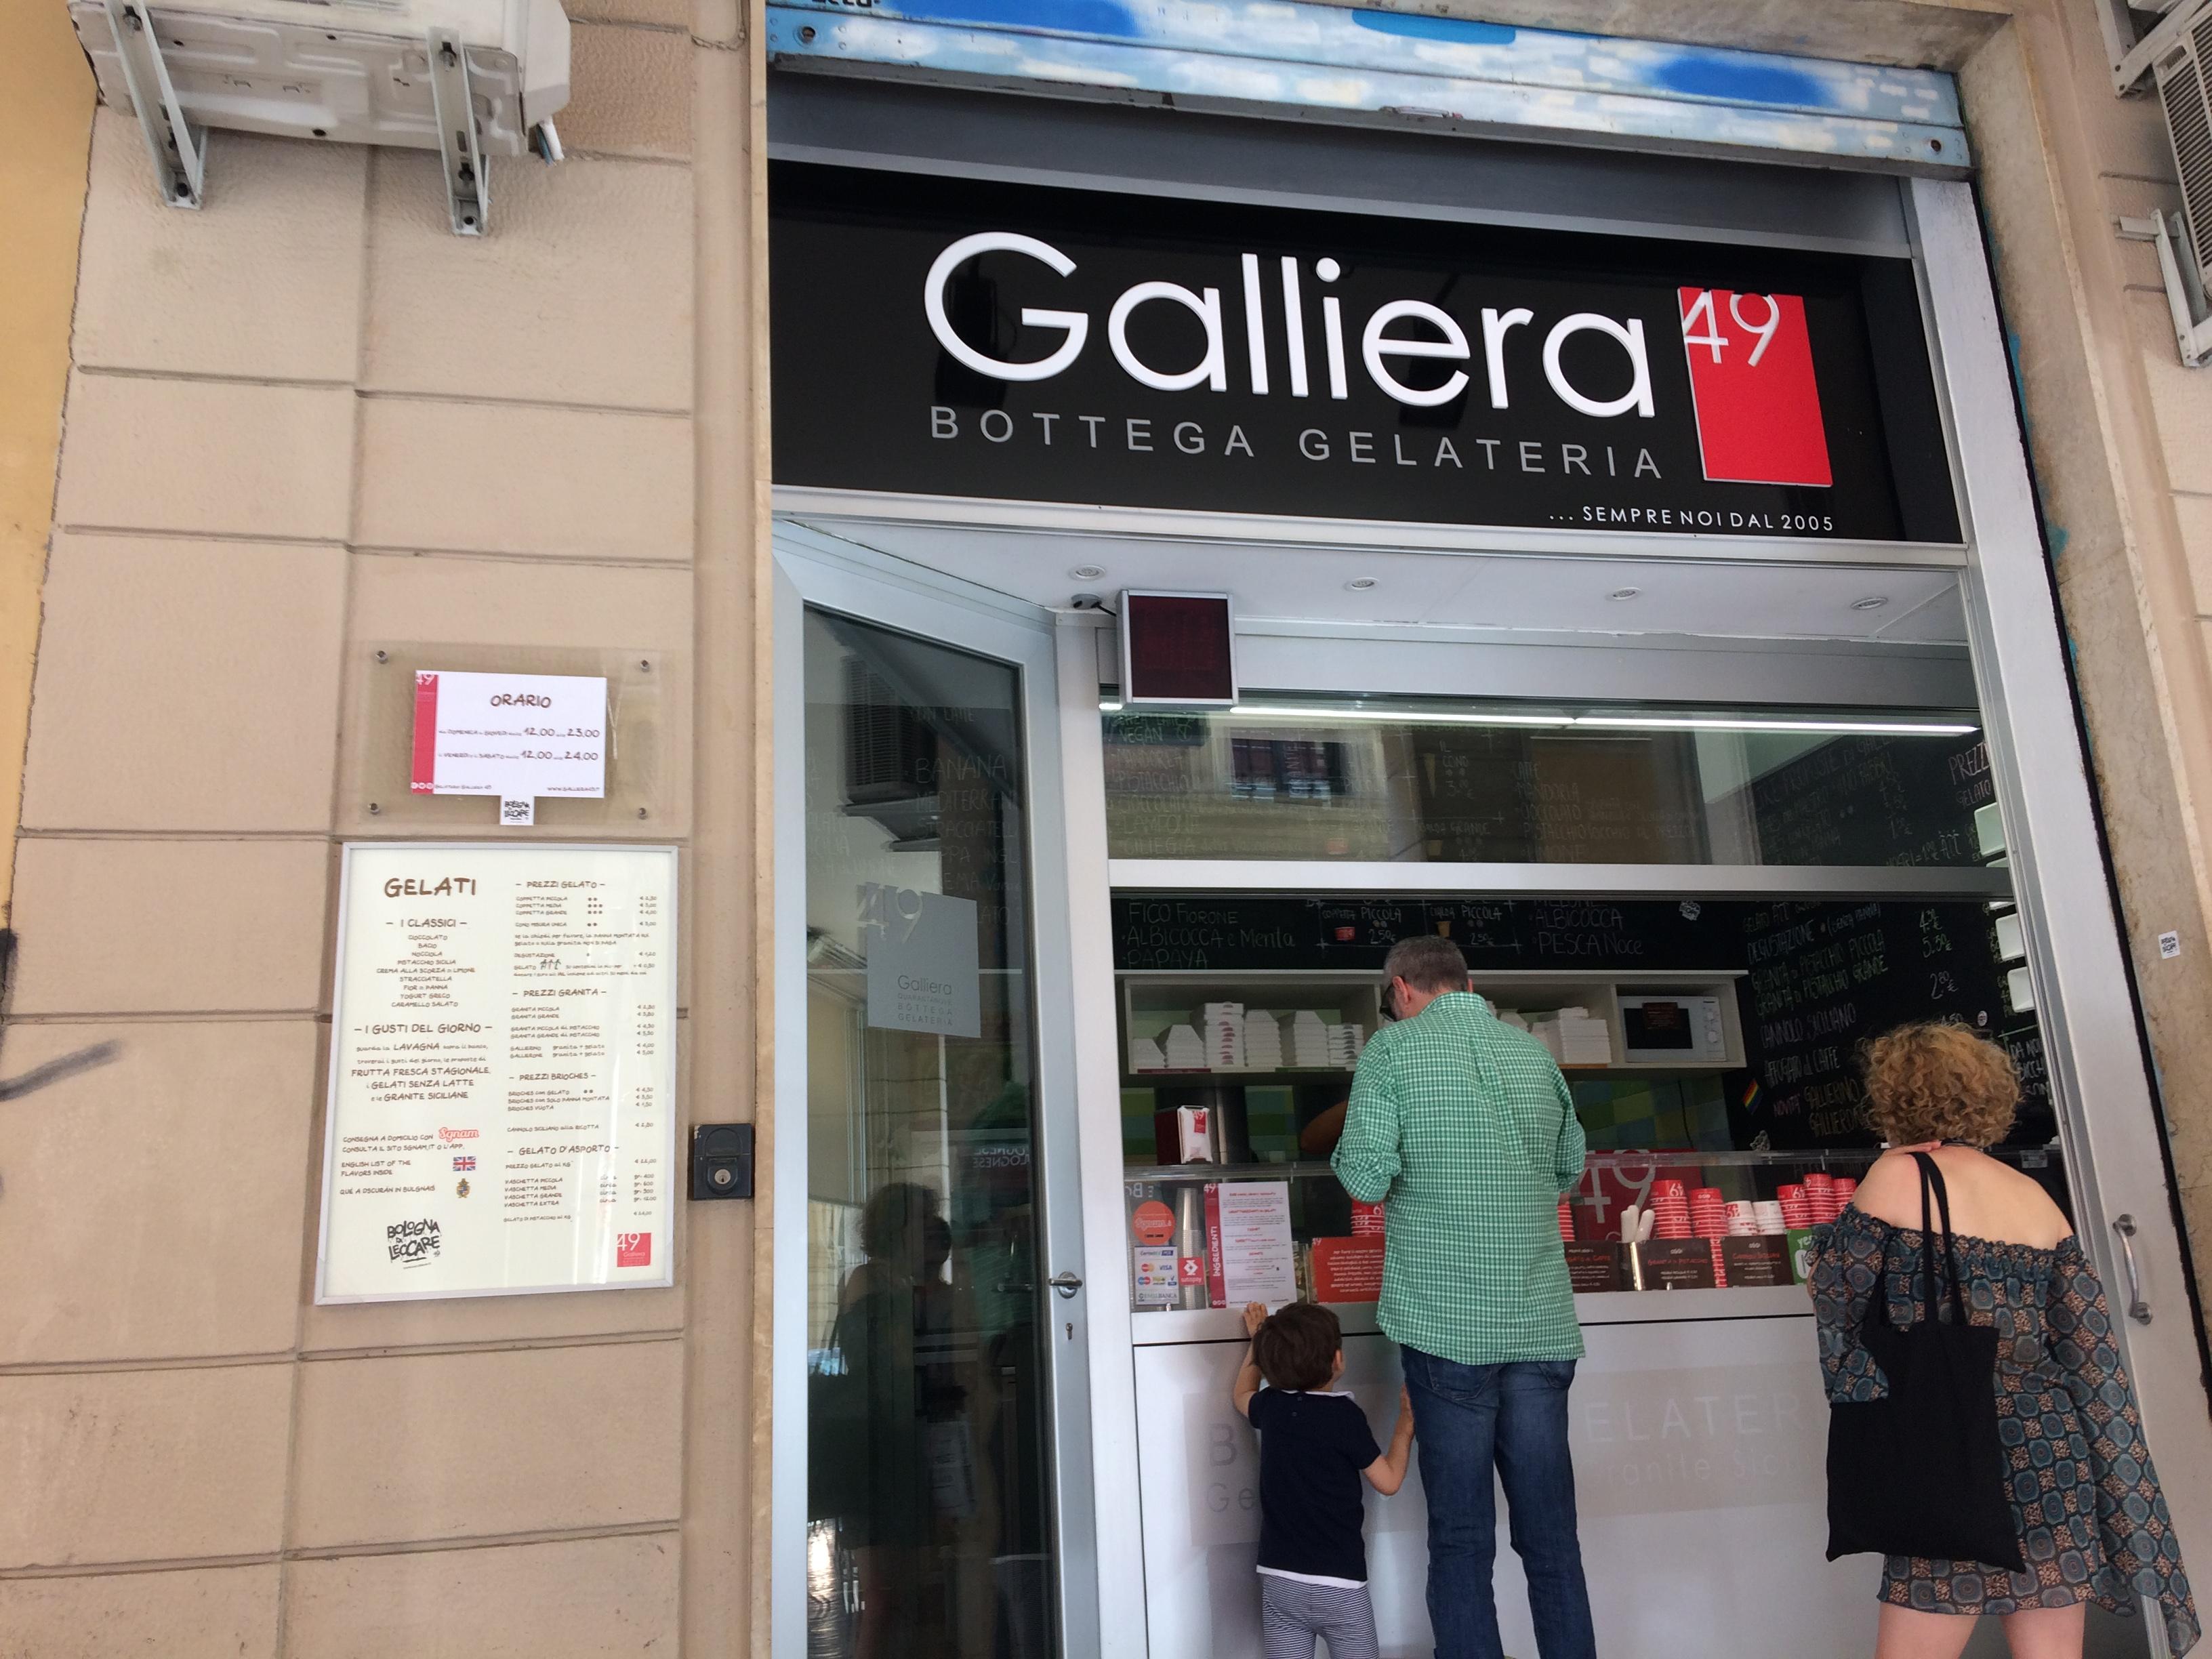 Cover image of this place Galliera 49